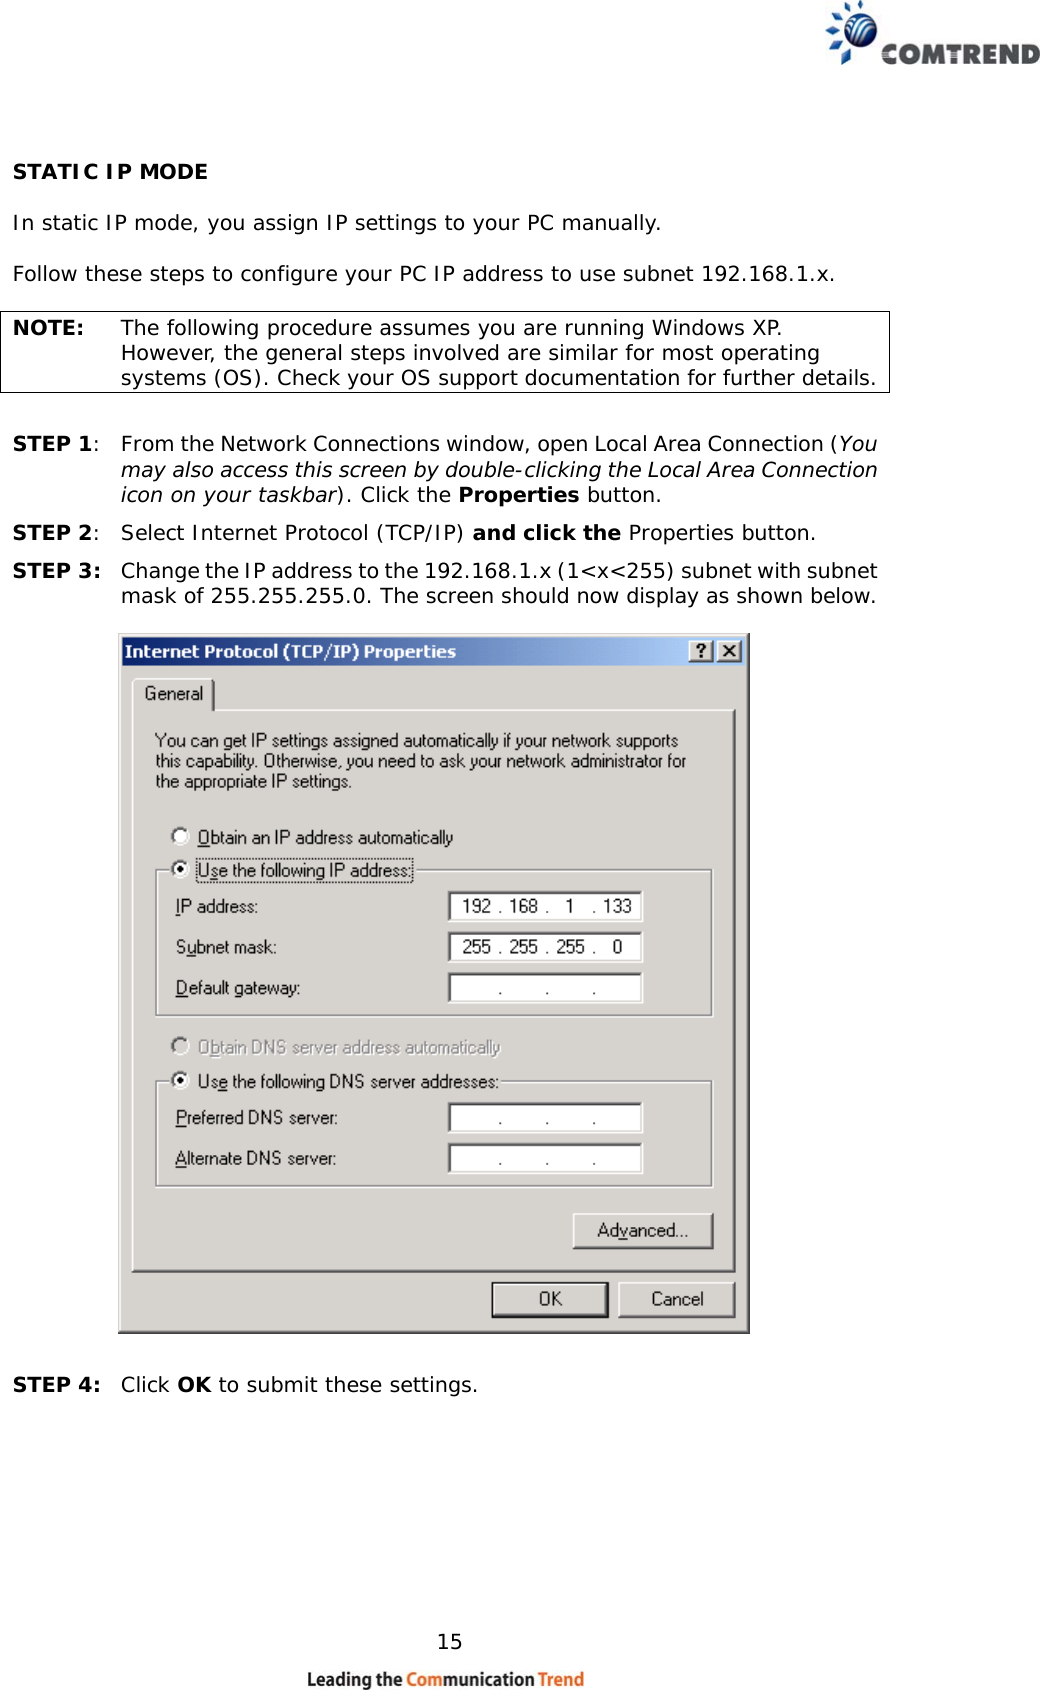    15 STATIC IP MODE  In static IP mode, you assign IP settings to your PC manually.  Follow these steps to configure your PC IP address to use subnet 192.168.1.x.  NOTE:  The following procedure assumes you are running Windows XP.  However, the general steps involved are similar for most operating systems (OS). Check your OS support documentation for further details.  STEP 1:  From the Network Connections window, open Local Area Connection (You may also access this screen by double-clicking the Local Area Connection icon on your taskbar). Click the Properties button. STEP 2:  Select Internet Protocol (TCP/IP) and click the Properties button. STEP 3:  Change the IP address to the 192.168.1.x (1&lt;x&lt;255) subnet with subnet mask of 255.255.255.0. The screen should now display as shown below.      STEP 4:  Click OK to submit these settings.  